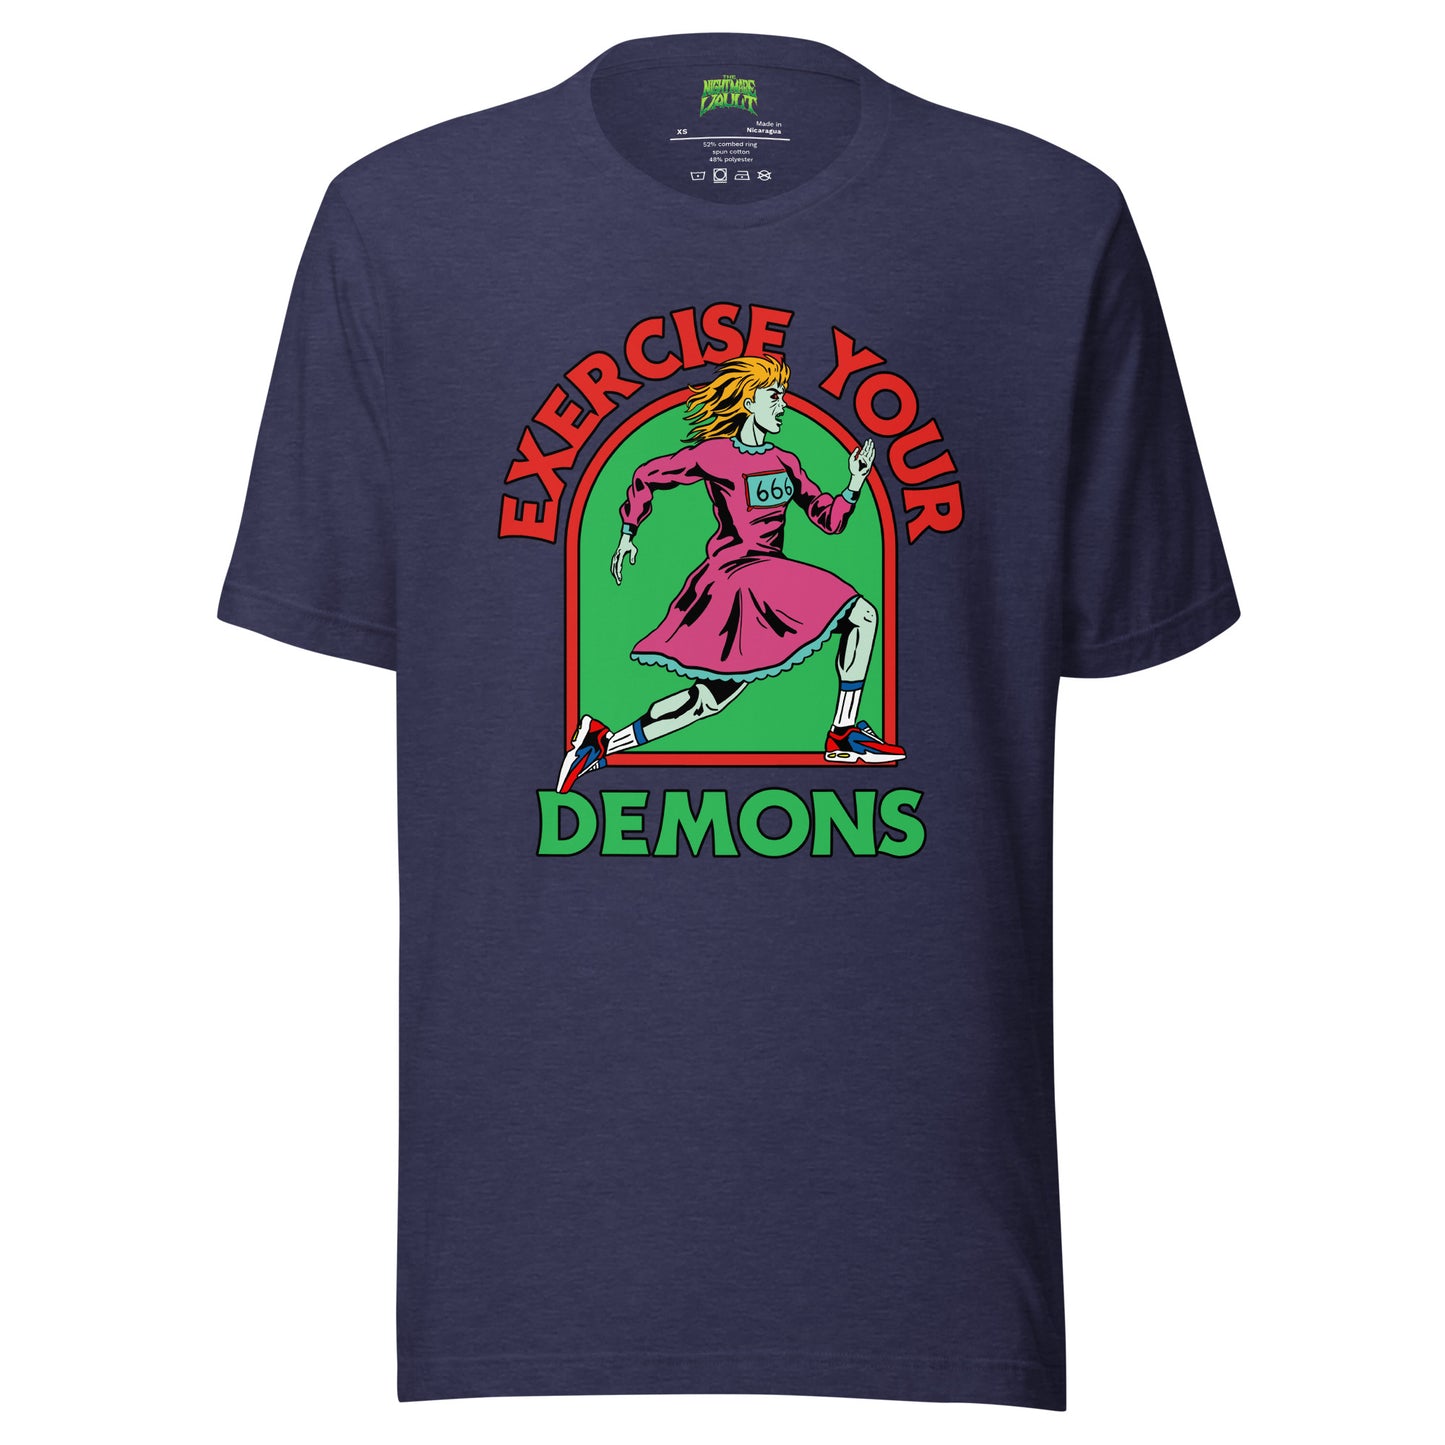 Exercise Your Demons tee